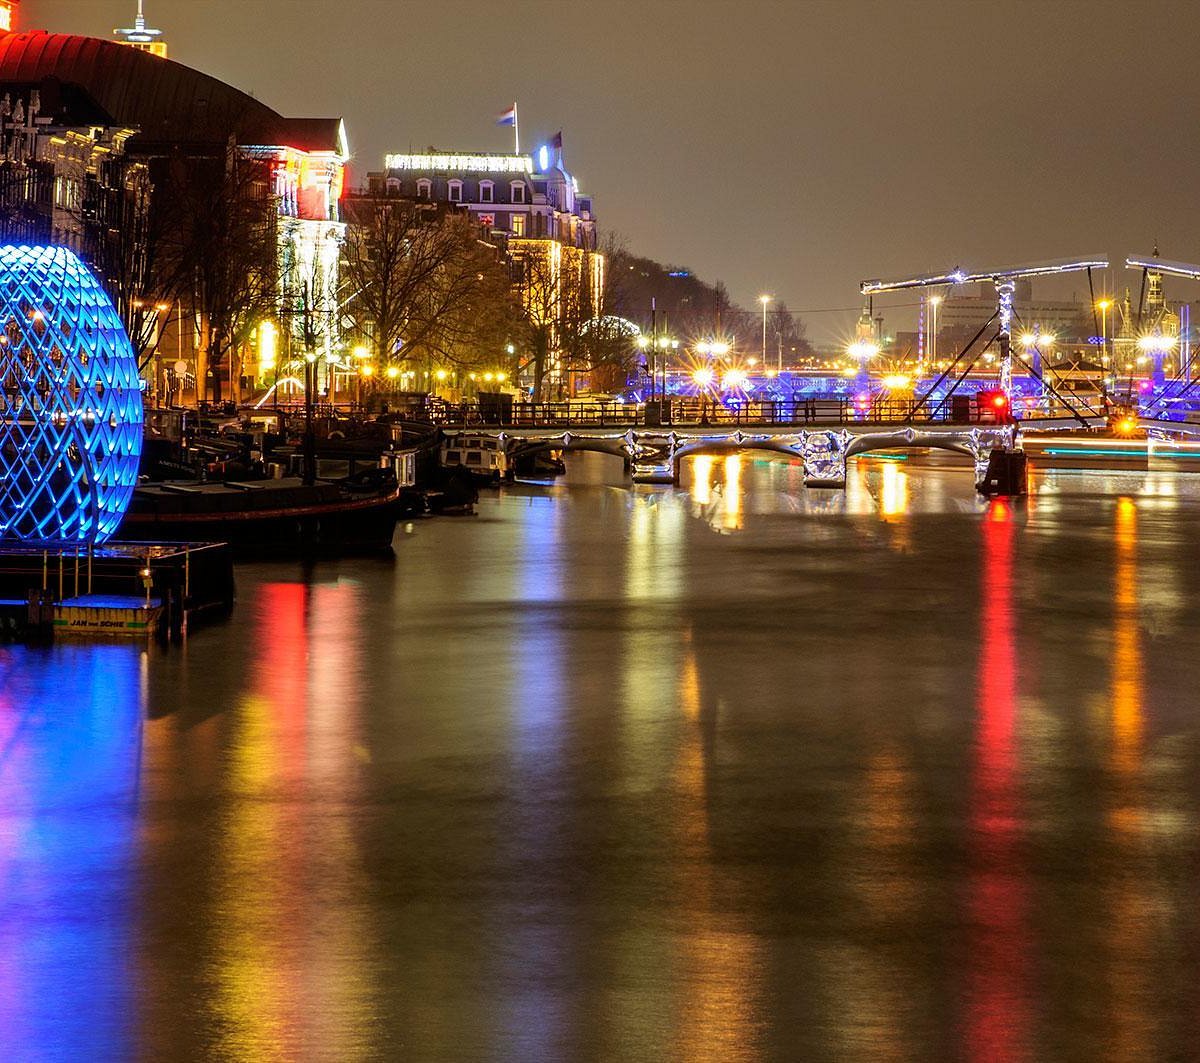 AMSTERDAM LIGHT FESTIVAL - All You Need to Know BEFORE You Go